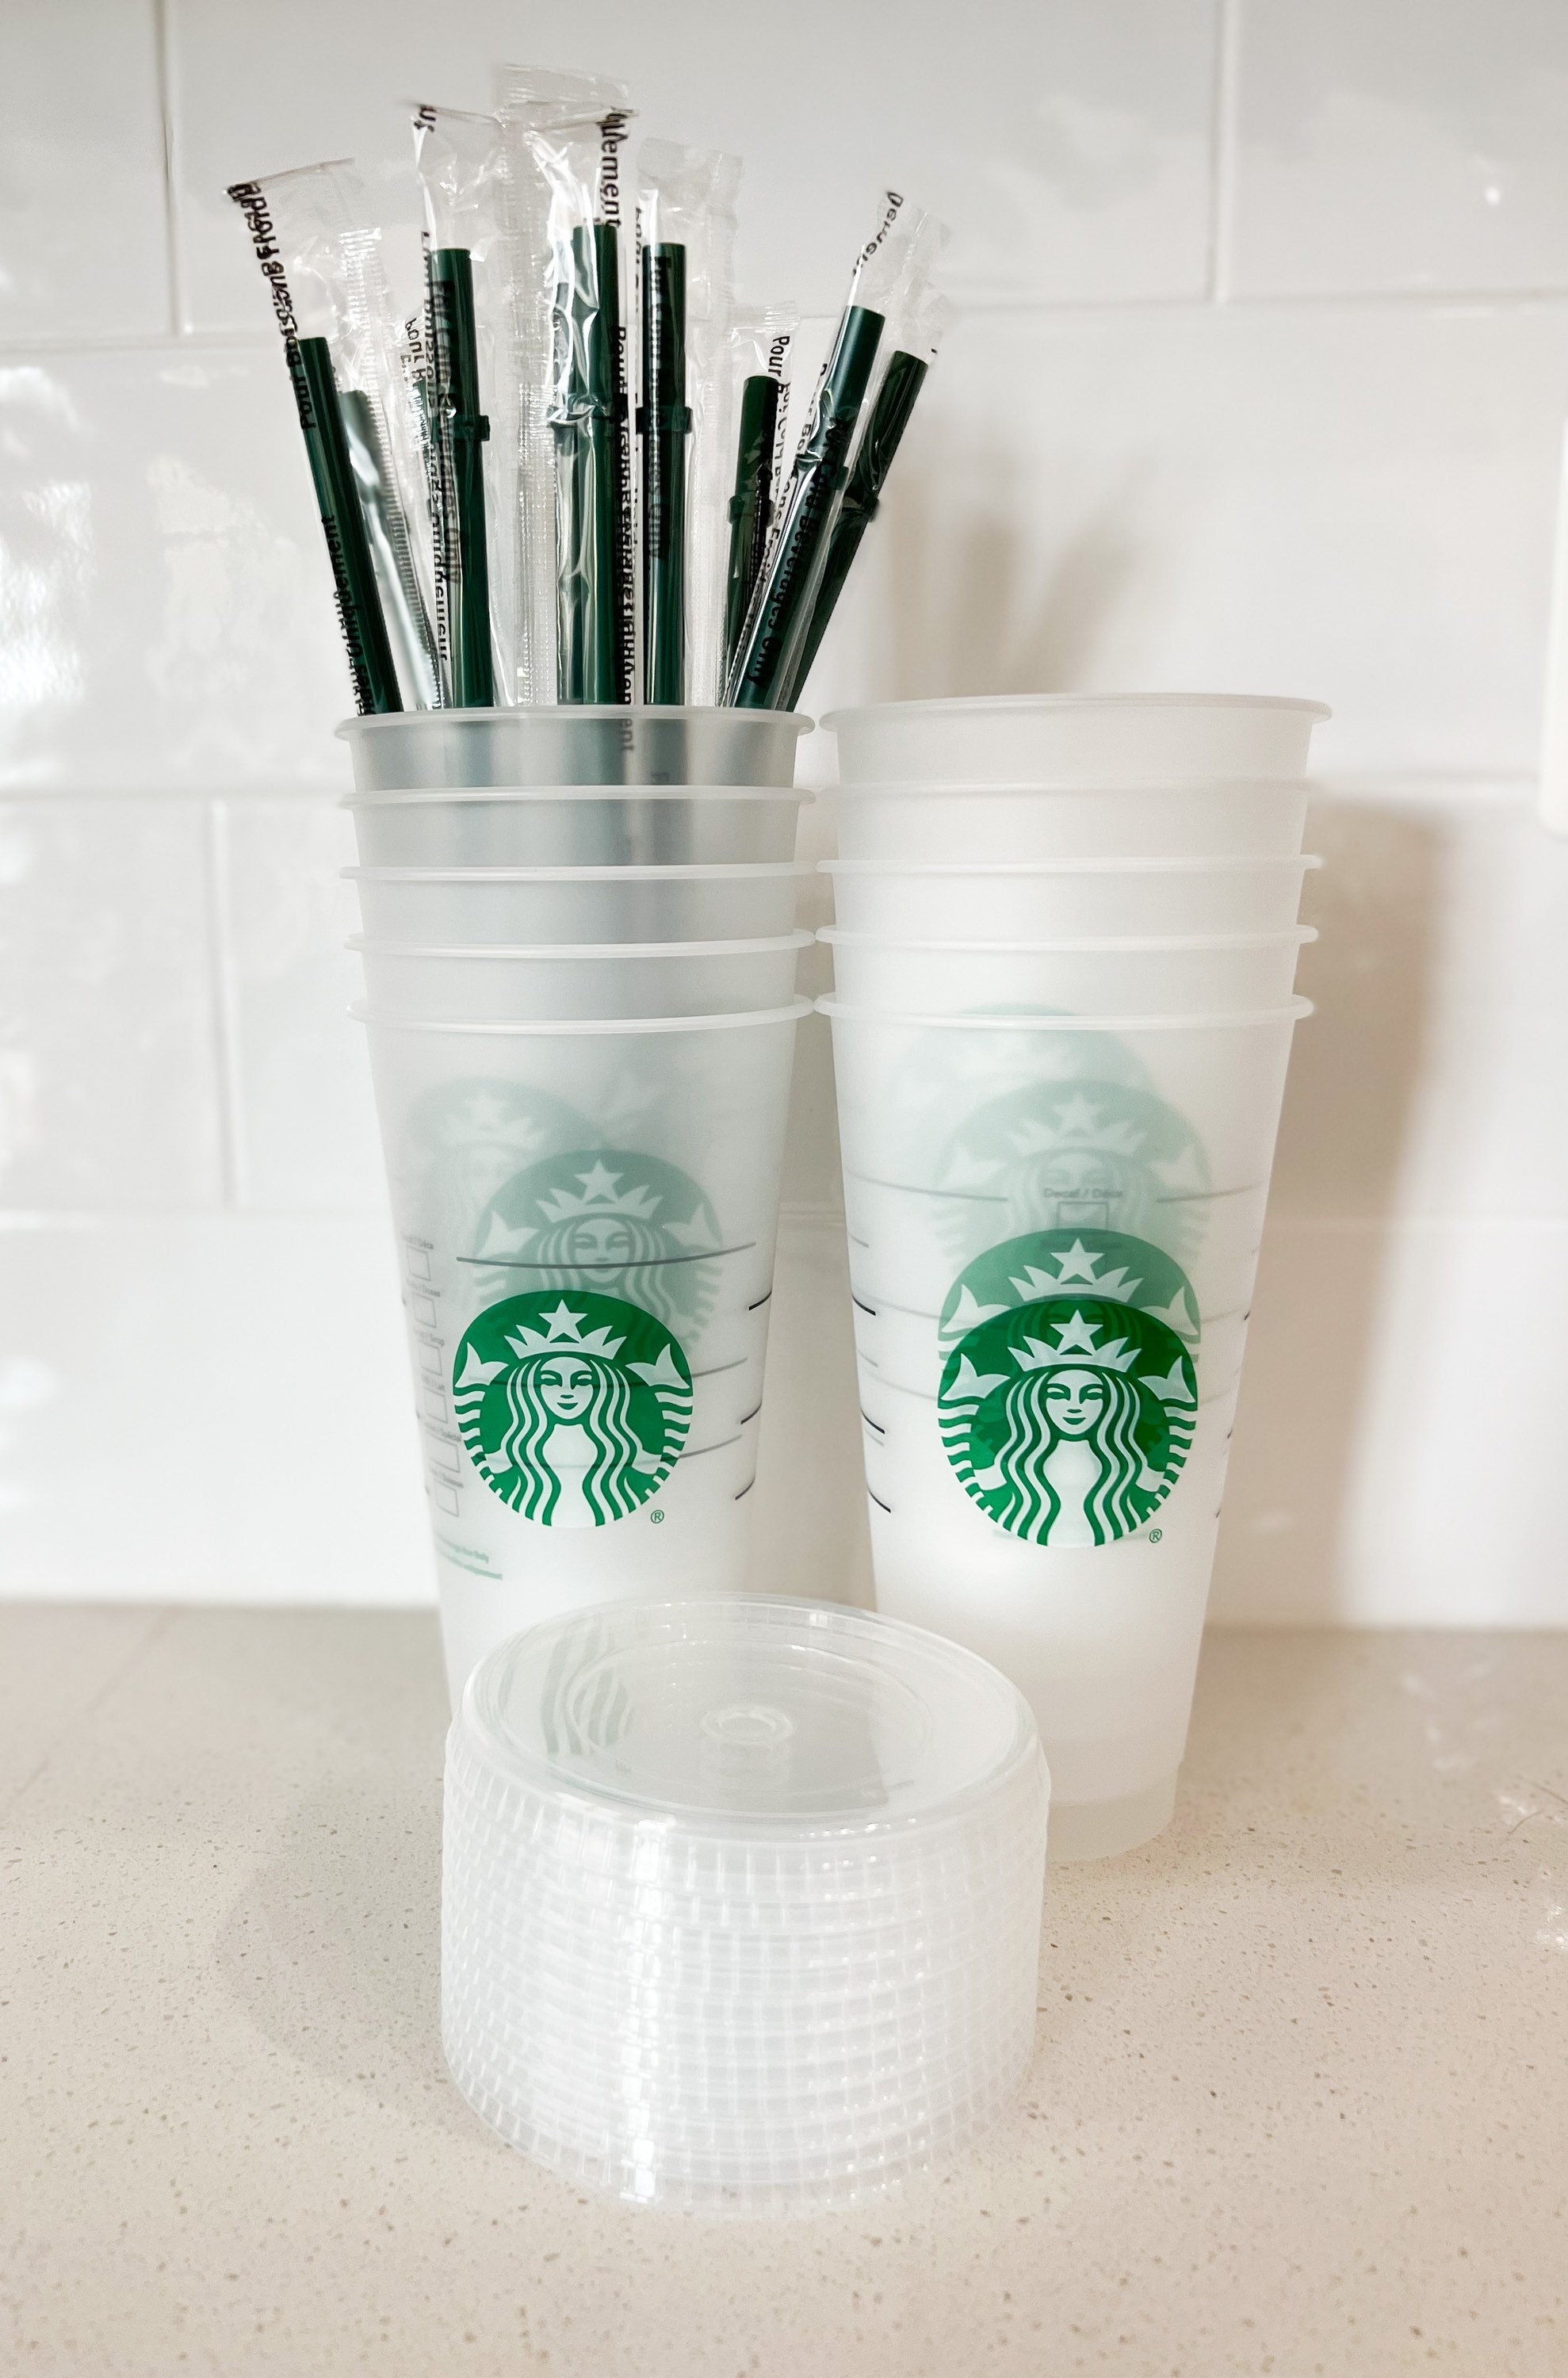 Milk Shake Starbucks Reusable Hot Cup STOPPER Seals Into Cup Lid Avoid  Spills Coffee Stopper 